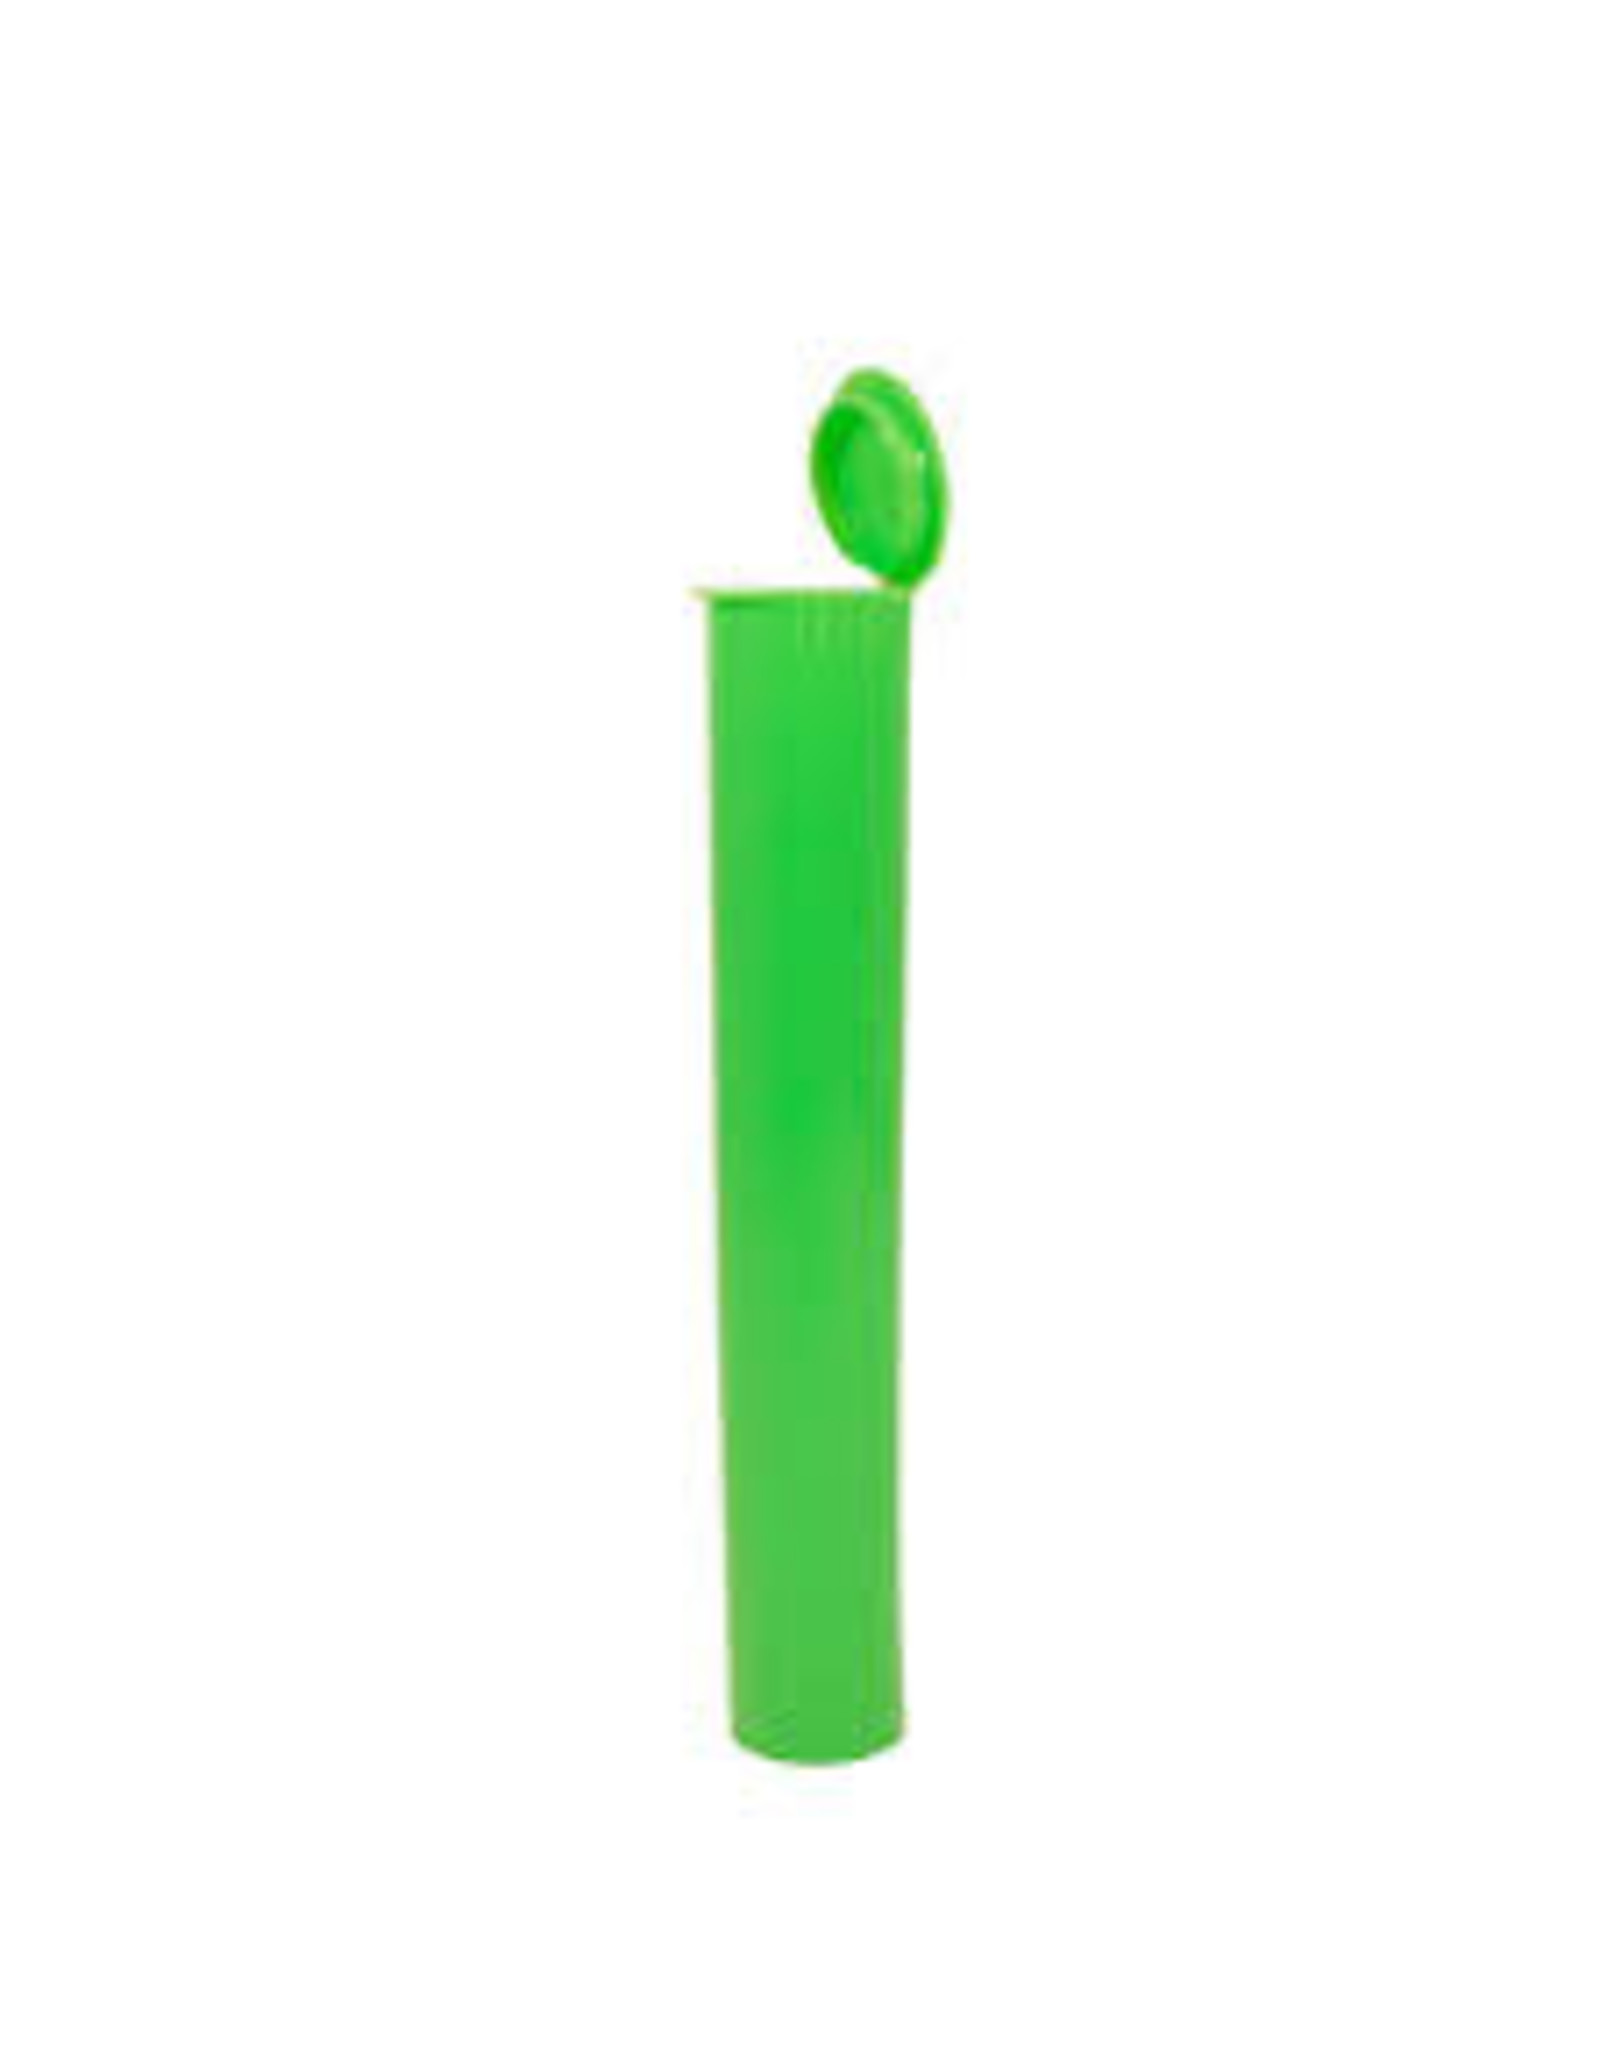 Pop Top Joint Container - 4.5 inches - Green